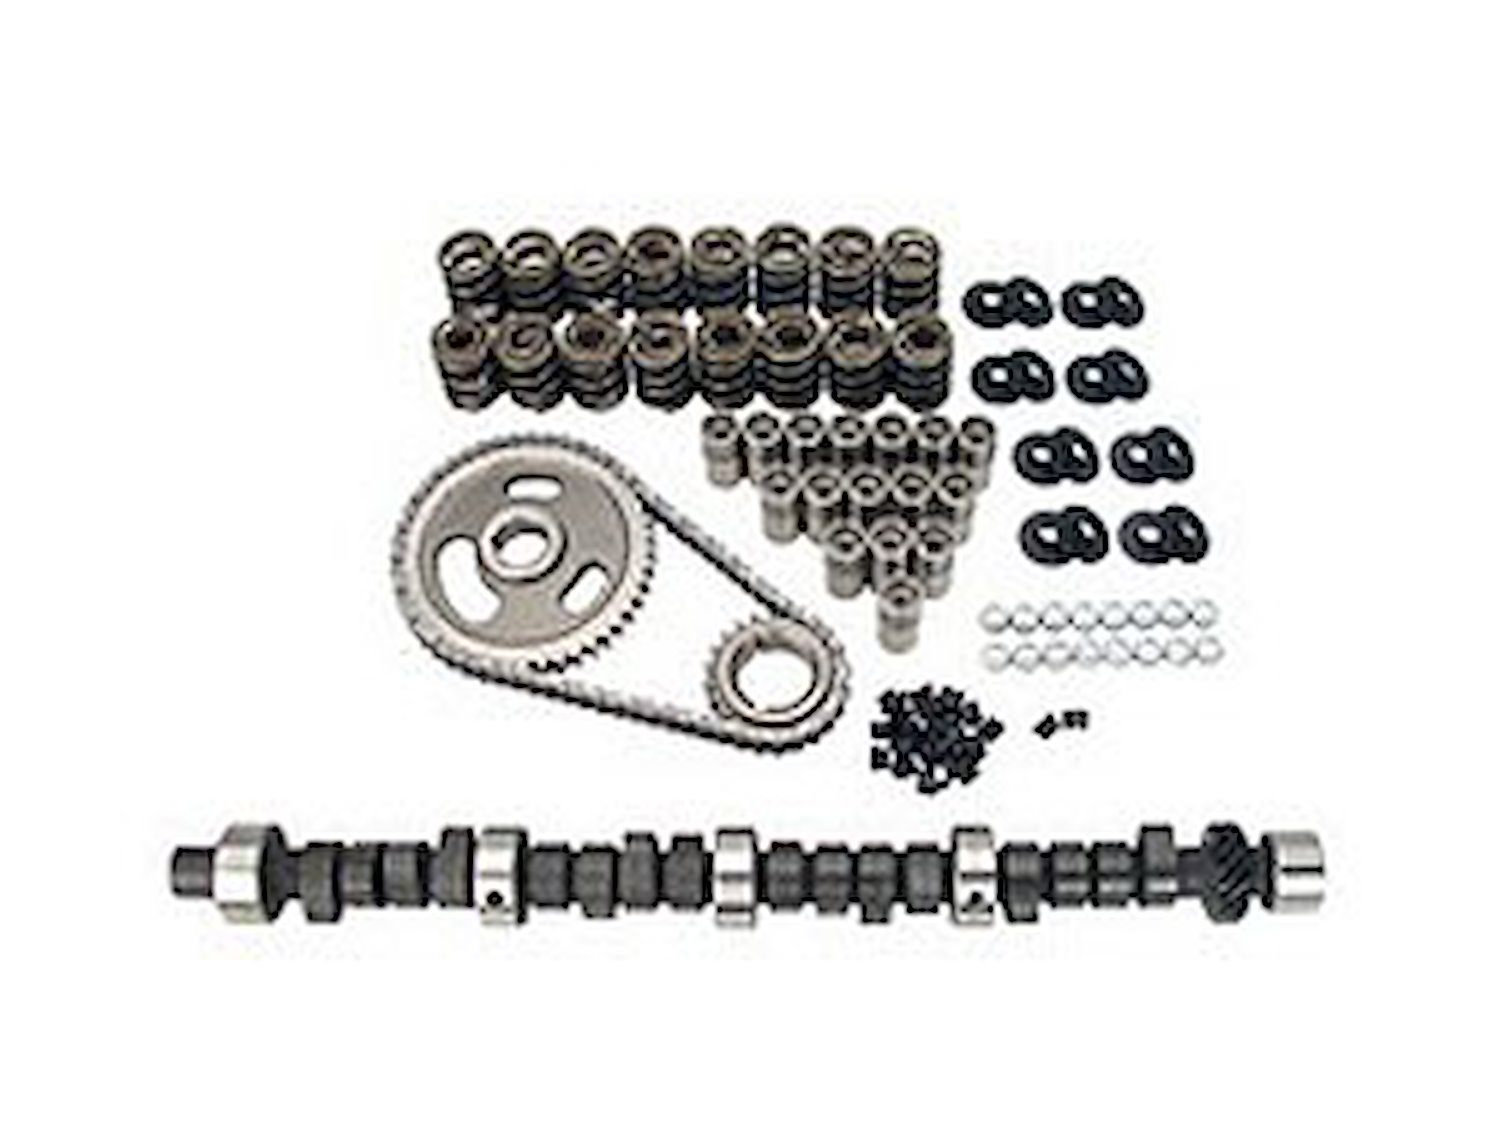 High Energy 260H Hydraulic Flat Tappet Camshaft Complete Kit Lift: .440" /.440" Duration: 260°/260° RPM Range: 1200-5200